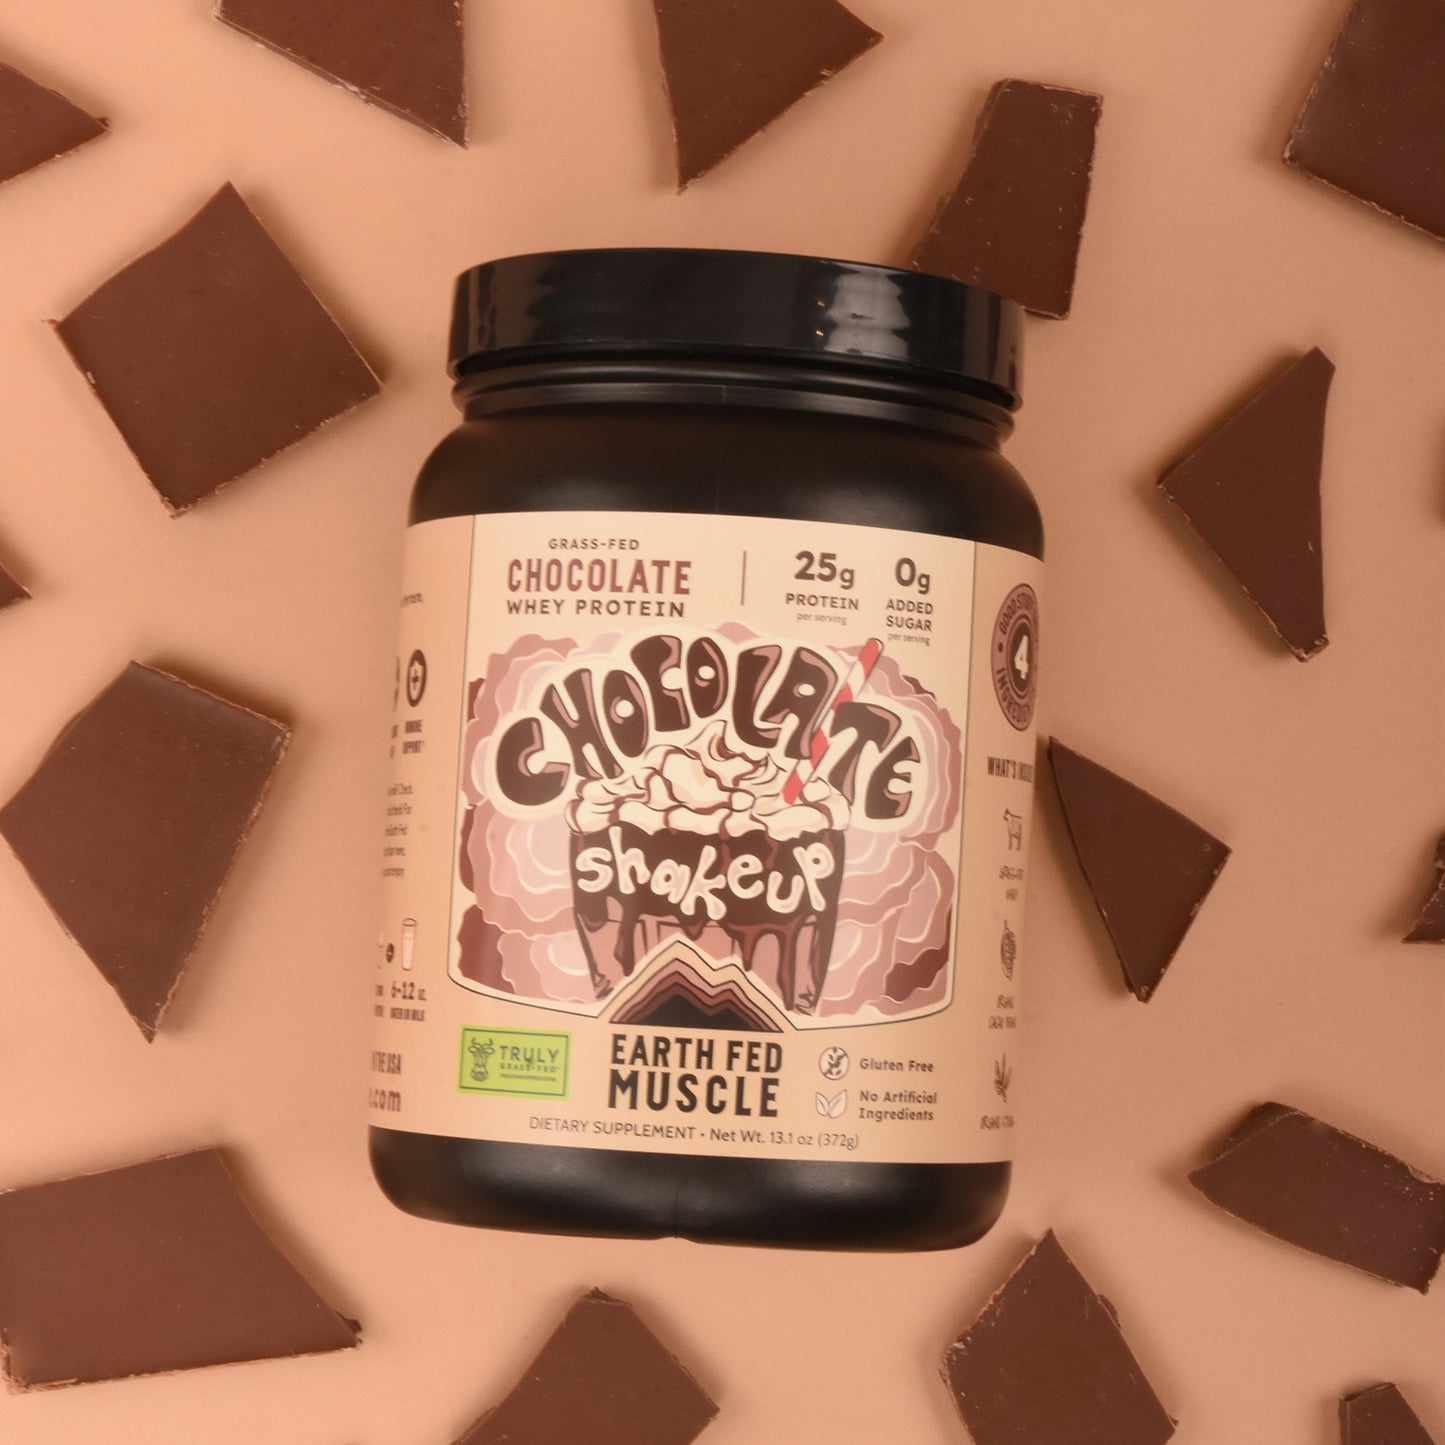 Chocolate Shakeup (formerly known as Ca-COW!) Chocolate Grass-Fed Protein